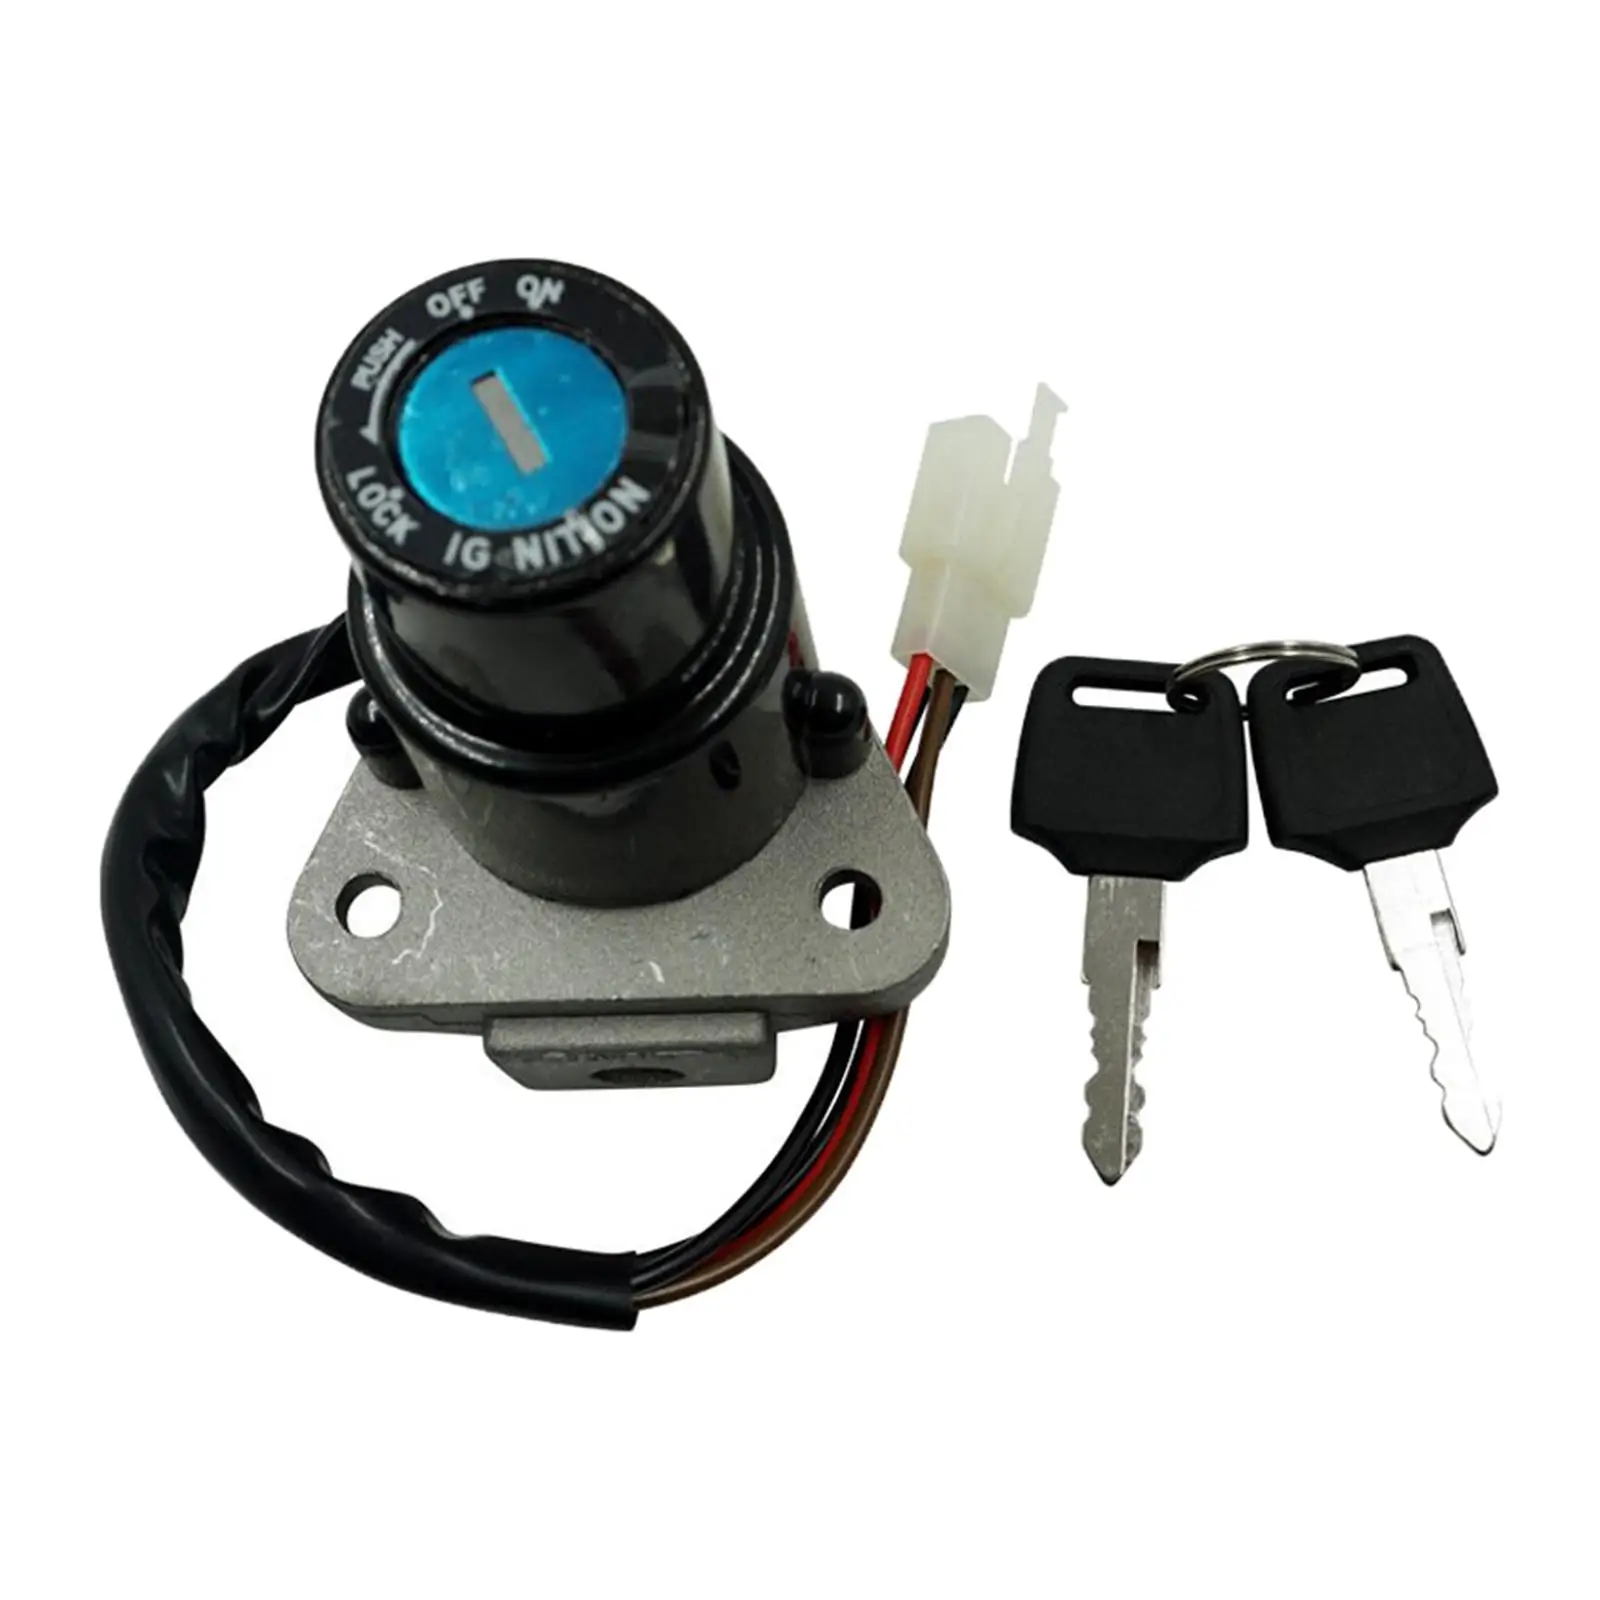 Motorcycle Ignition Switch Key Replace Electric Door Lock for Yamaha DT125 TW200 TW225 DT200 Tzr250